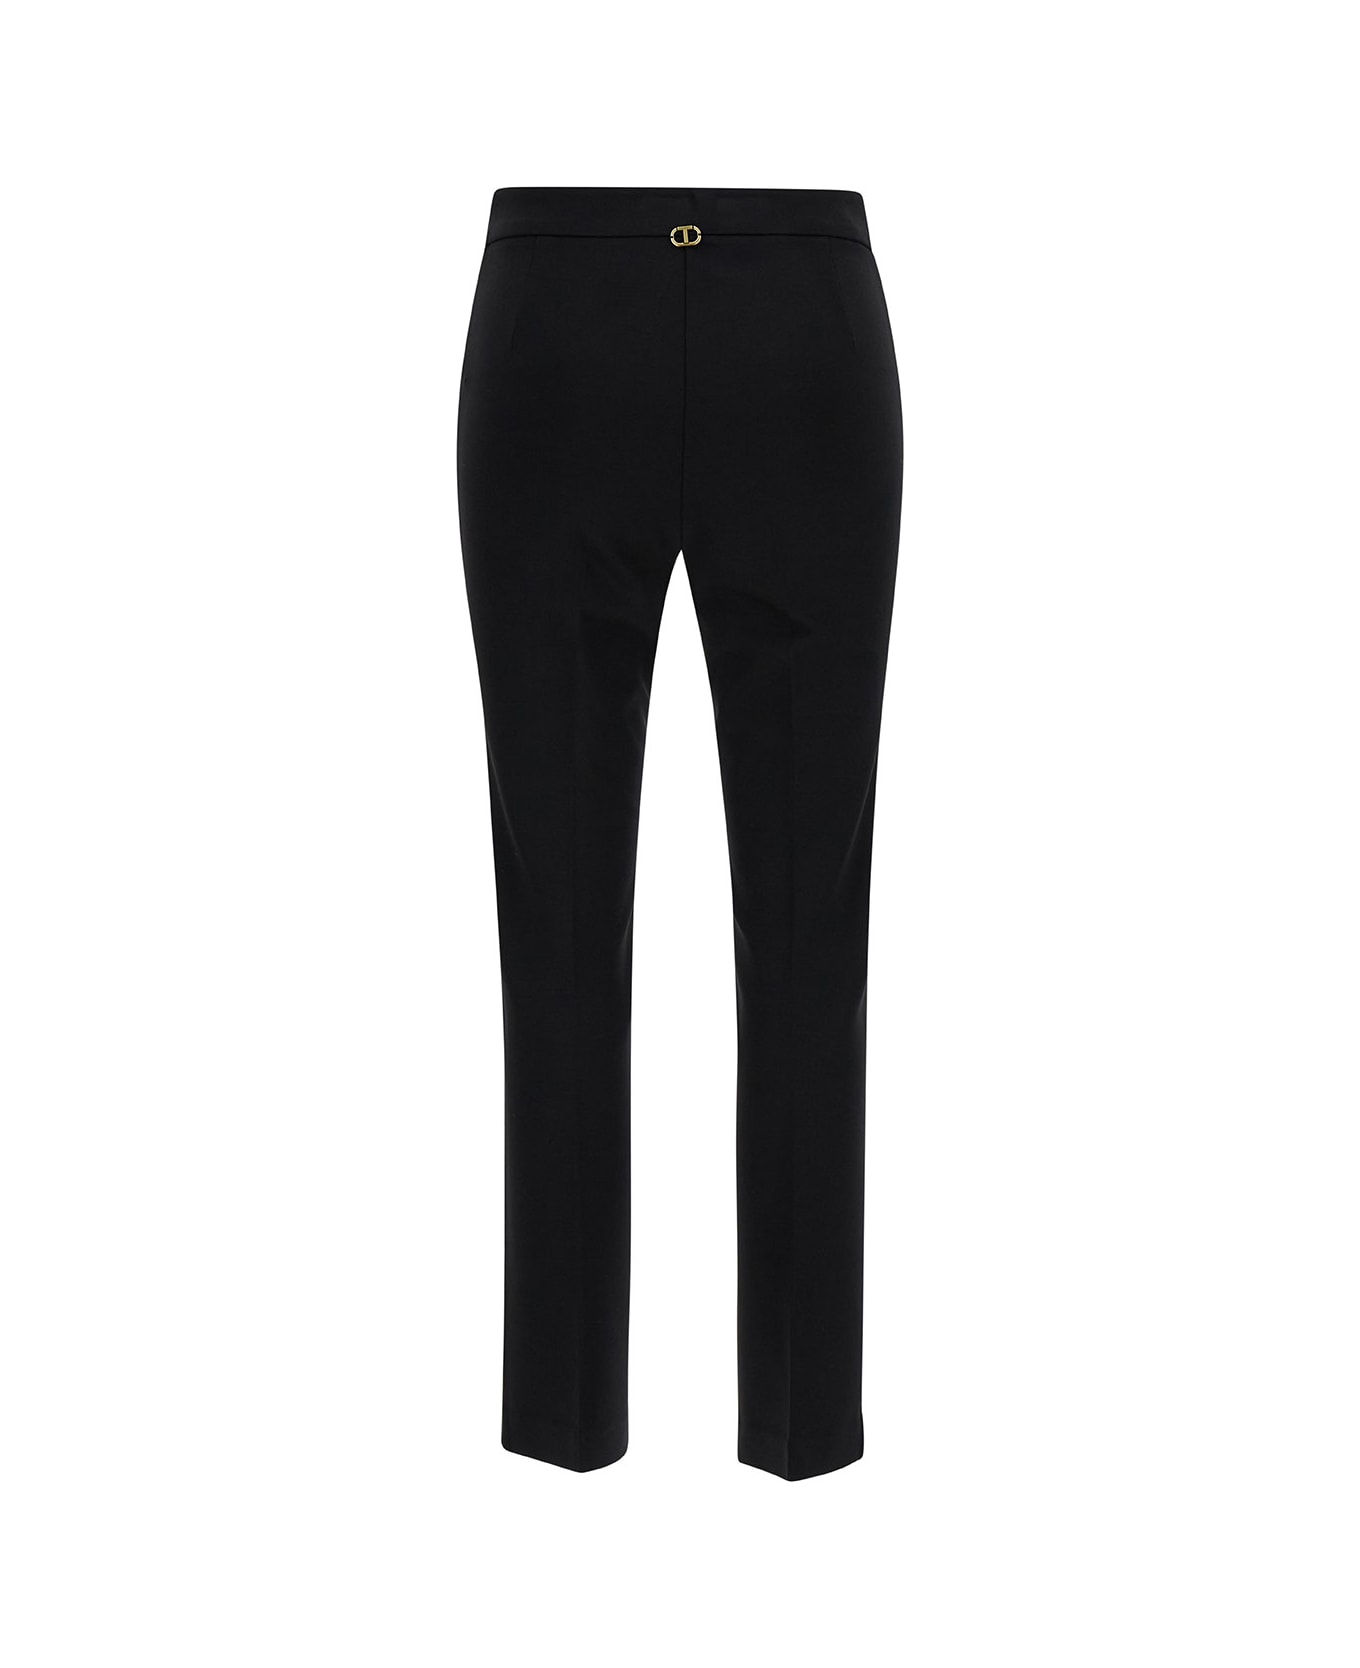 TwinSet Black Flare Pants With Oval T Buckle In Viscose Blend Woman - Black ボトムス